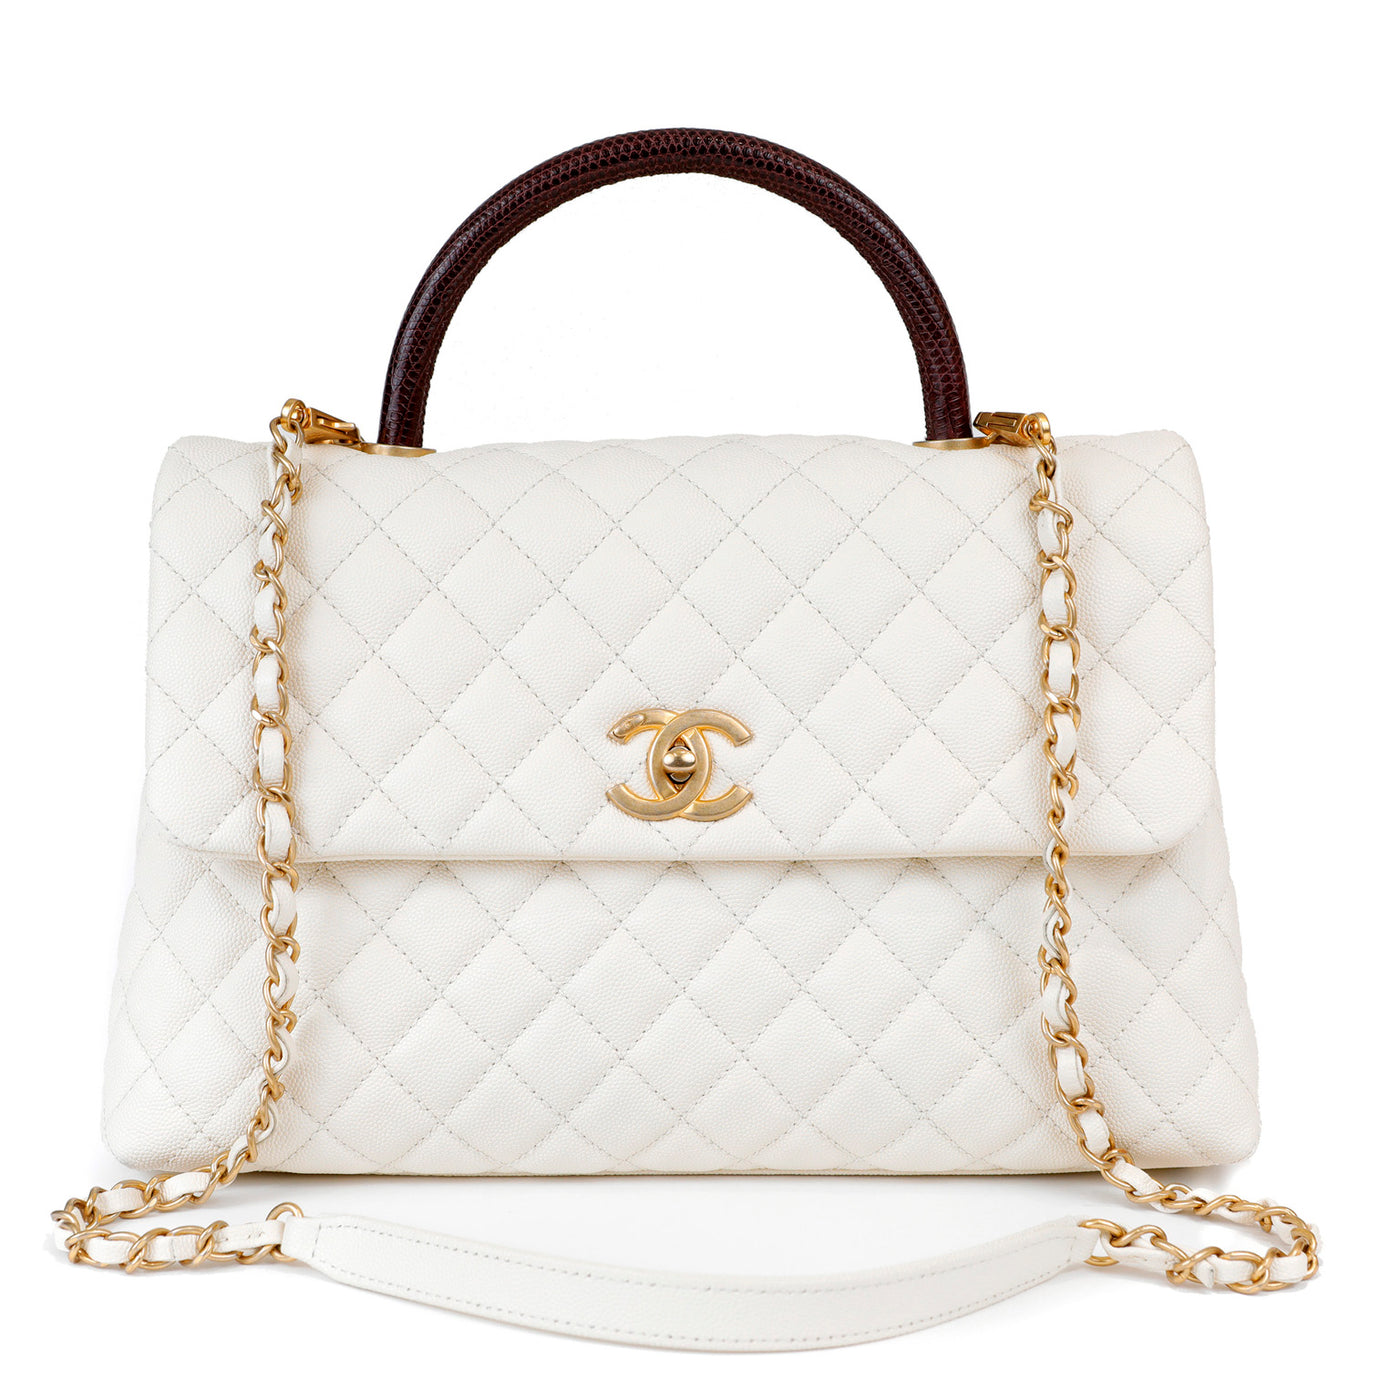 This stunning Chanel bag is the epitome of luxury and style